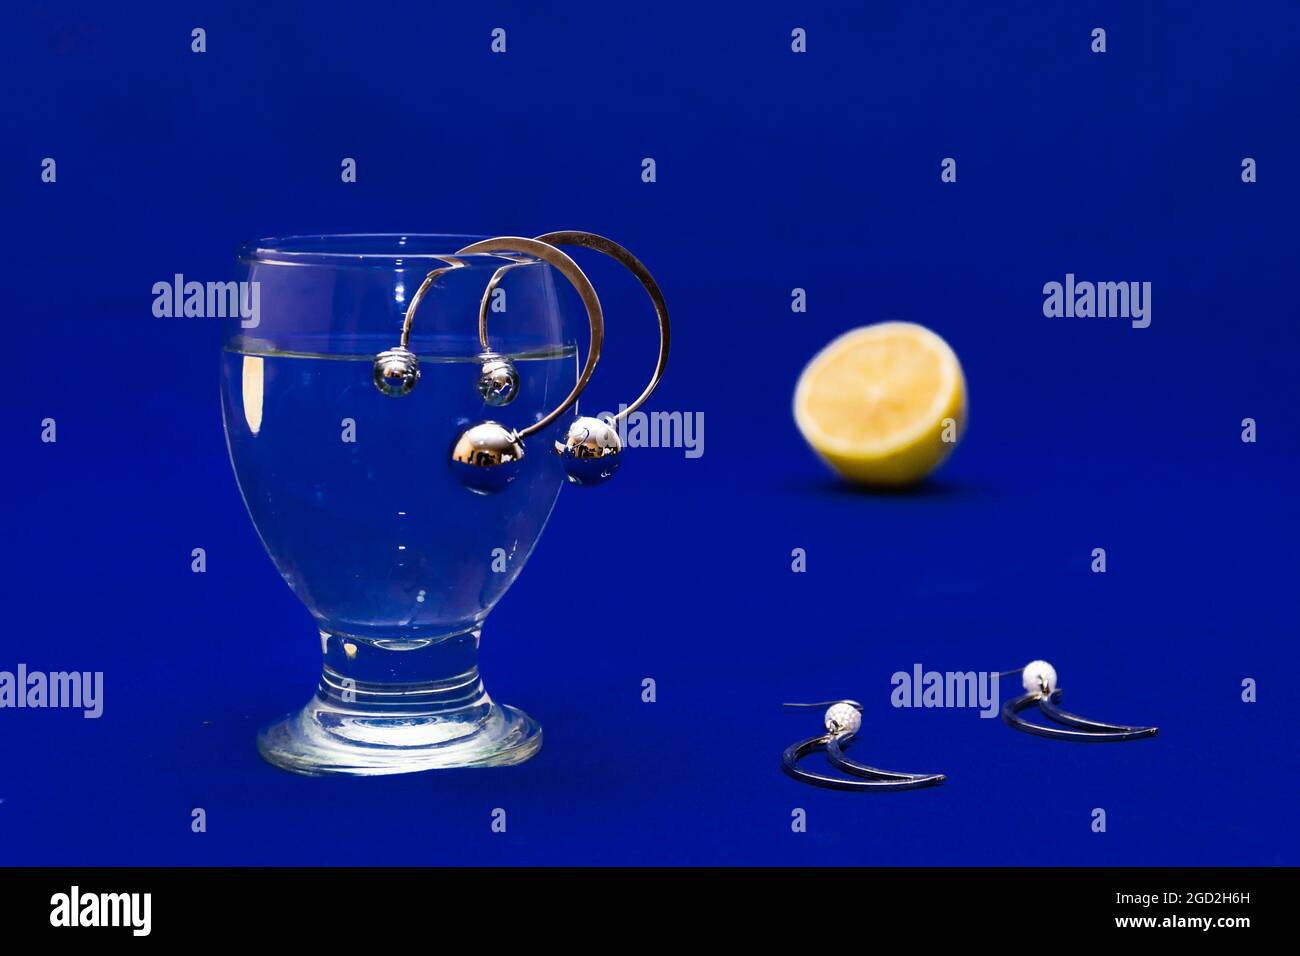 Pairs of silver earrings, a glass of water, and a slice of lemon on a blue surface Stock Photo